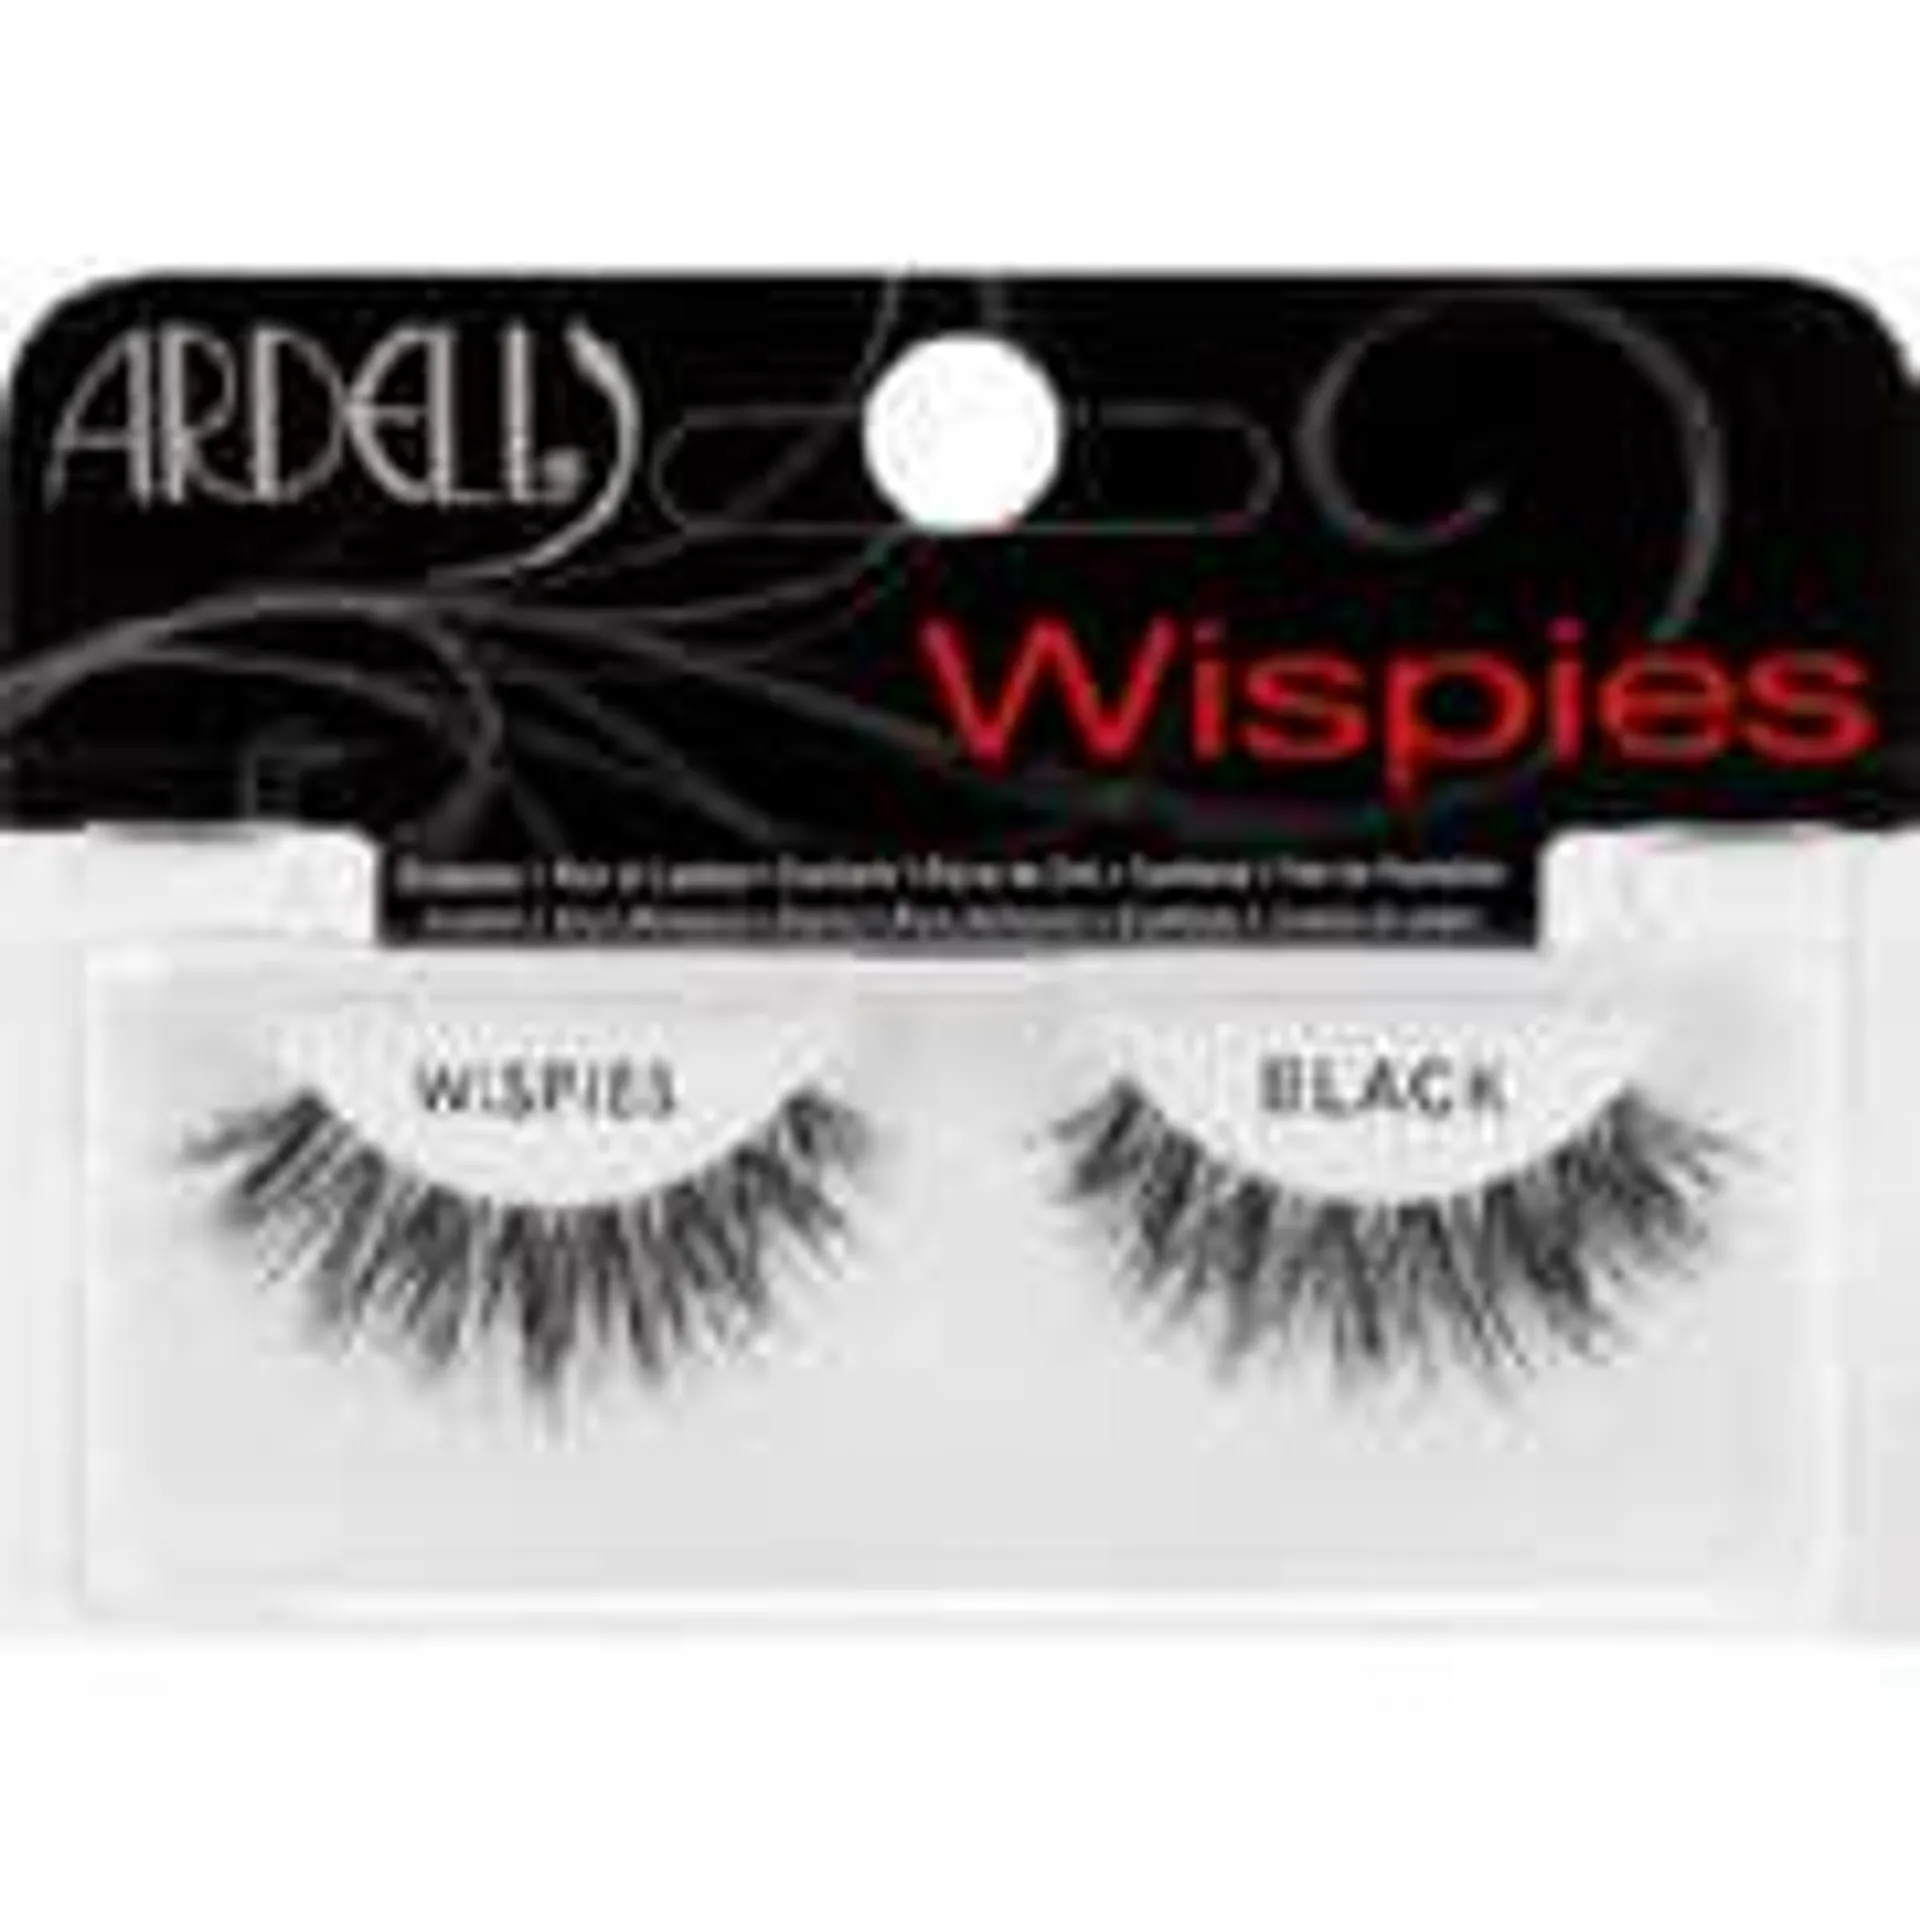 Beauty Essentials Natural Lashes